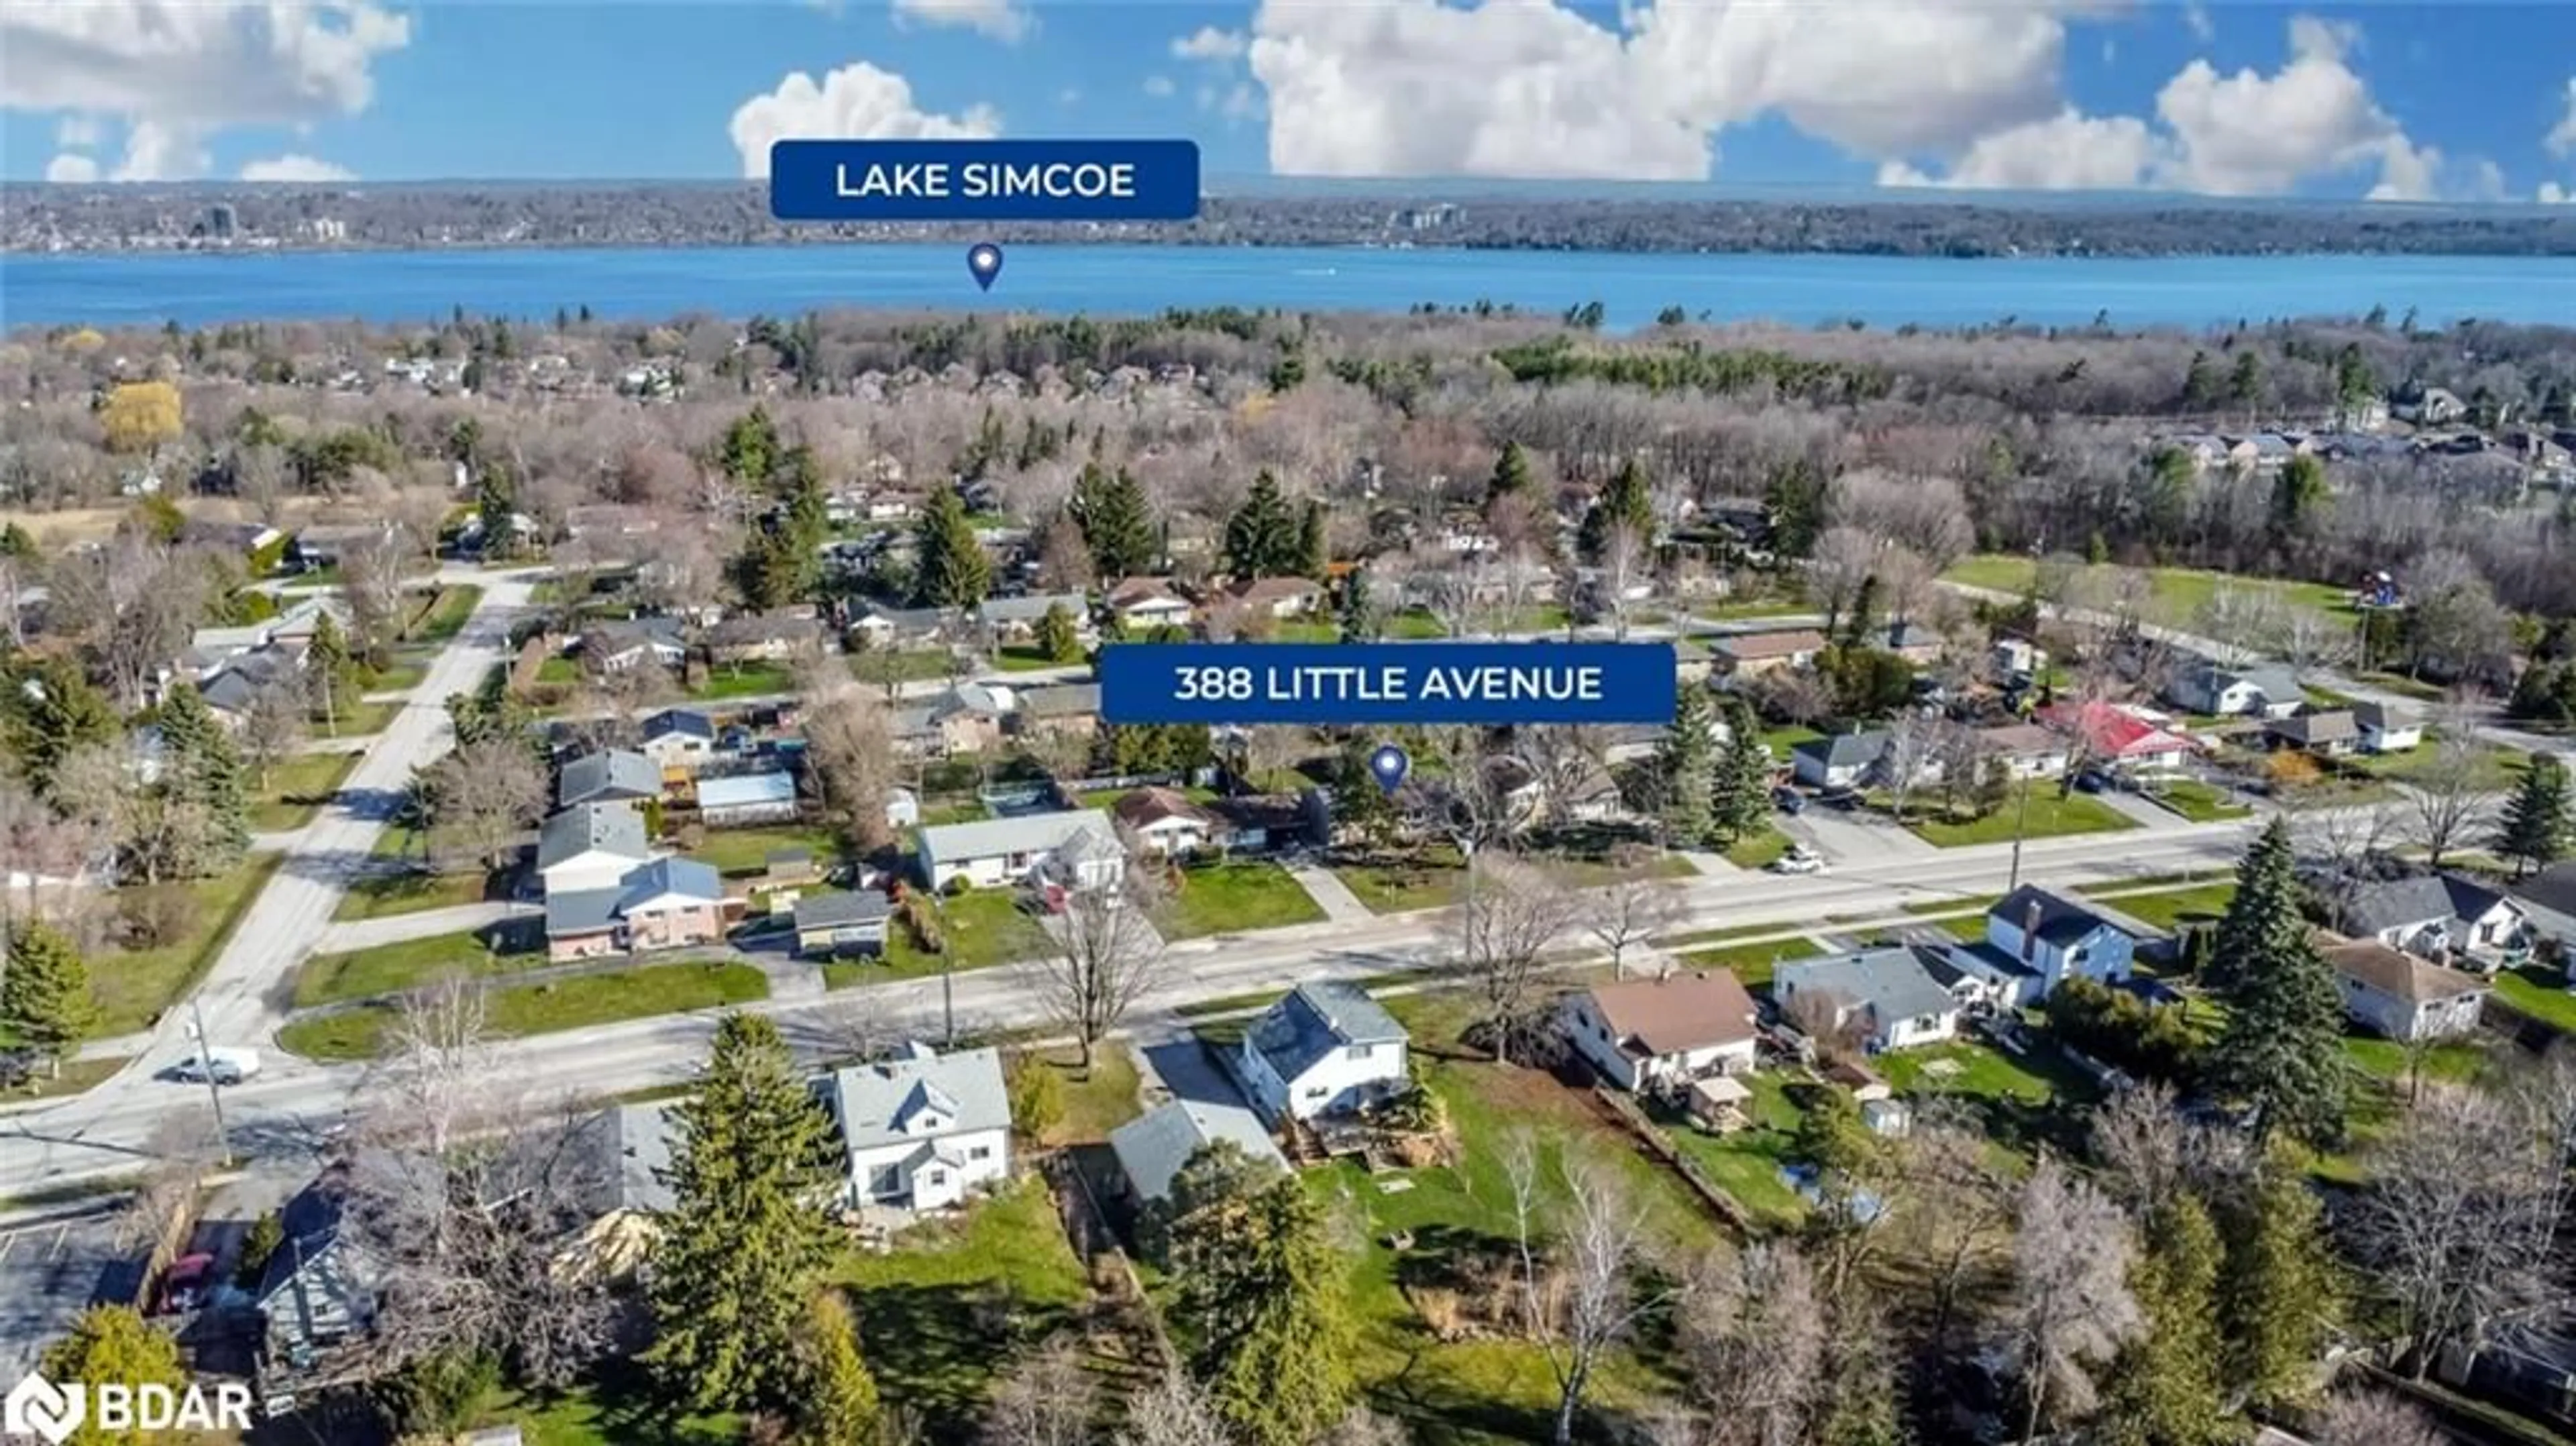 Lakeview for 388 Little Ave, Barrie Ontario L4N 2Z9